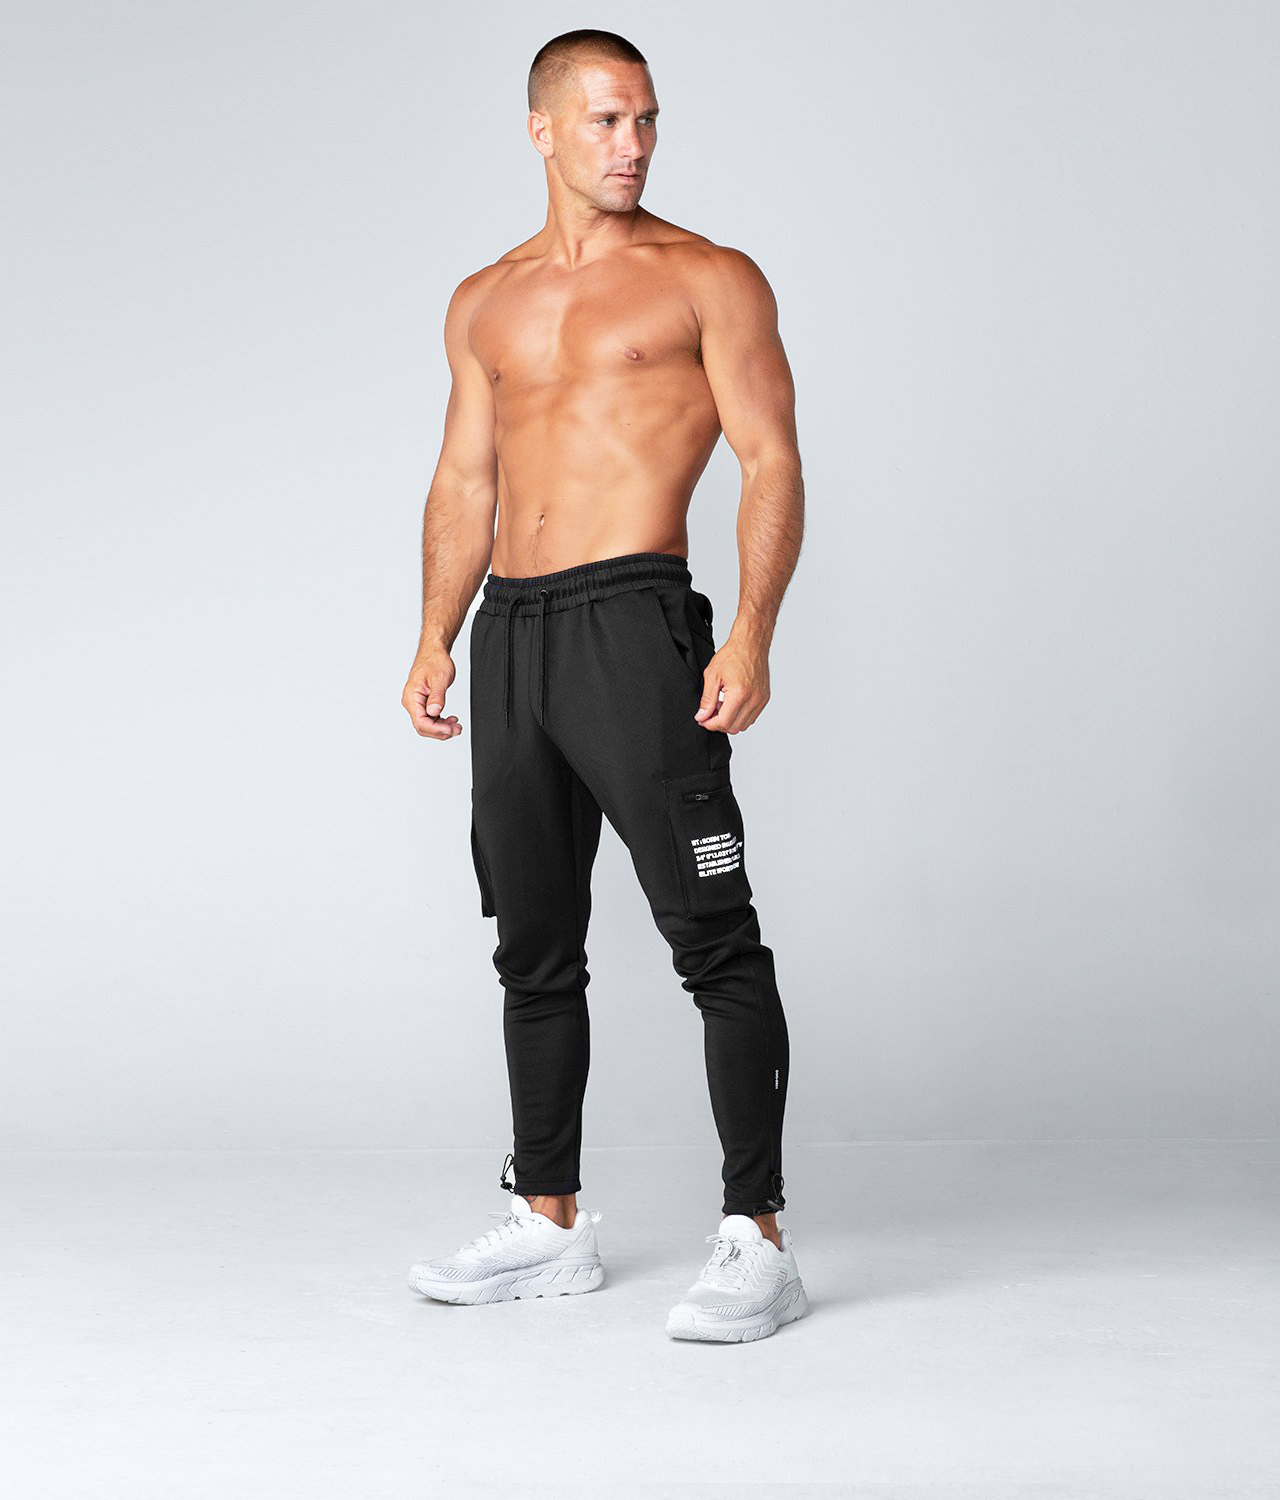 Born Tough Slim-Fit Mens Workout Joggers Pants, Tapered Bodybuilding Gym  Joggers, Athletic Running Sweatpants Zipper Pockets